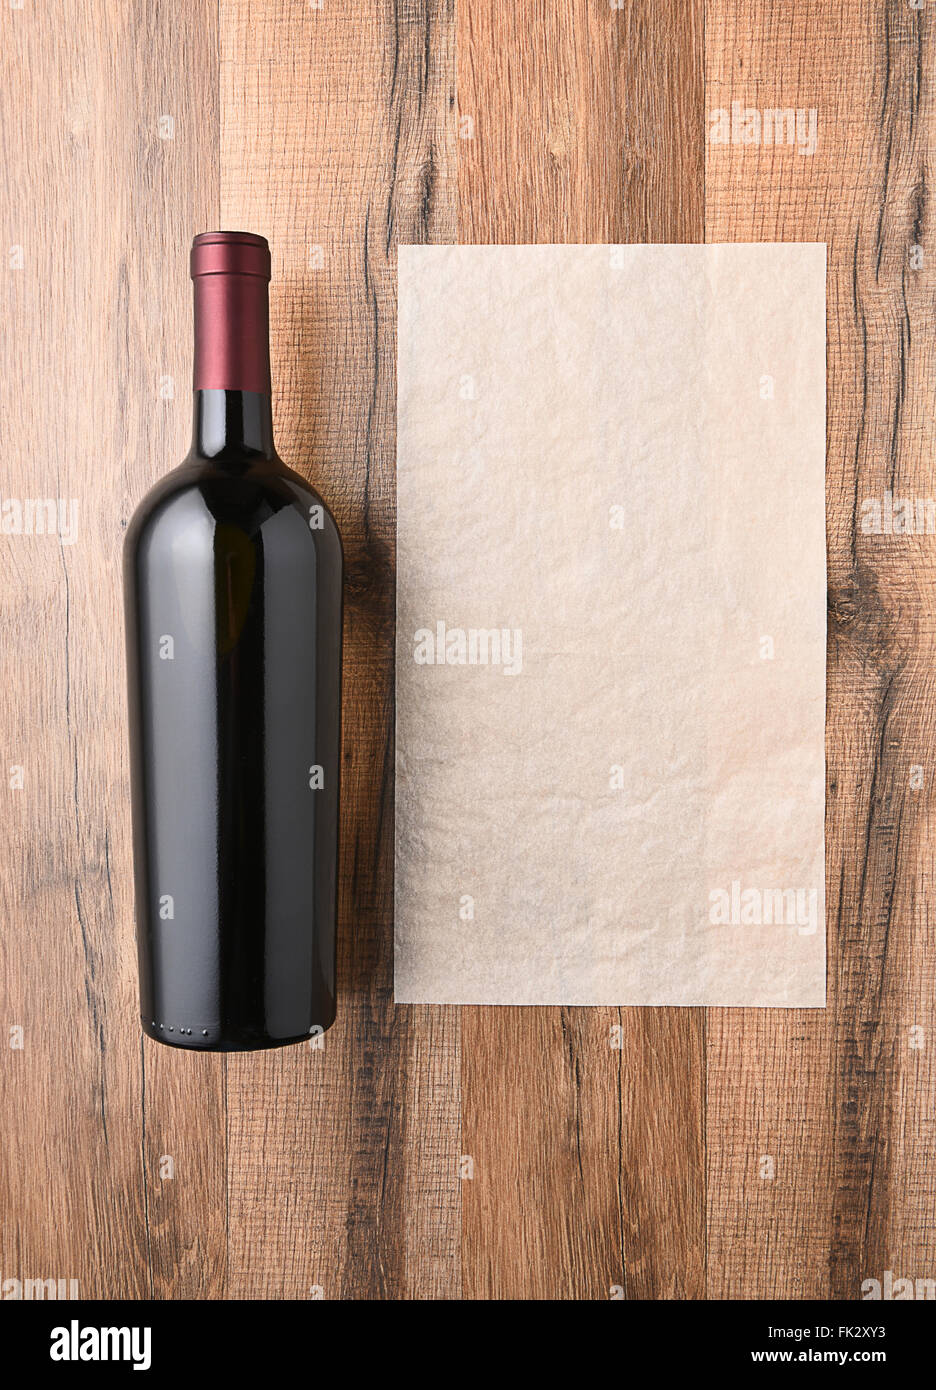 Top view of a wine bottle next to a blank sheet of paper. Wine list concept. Stock Photo